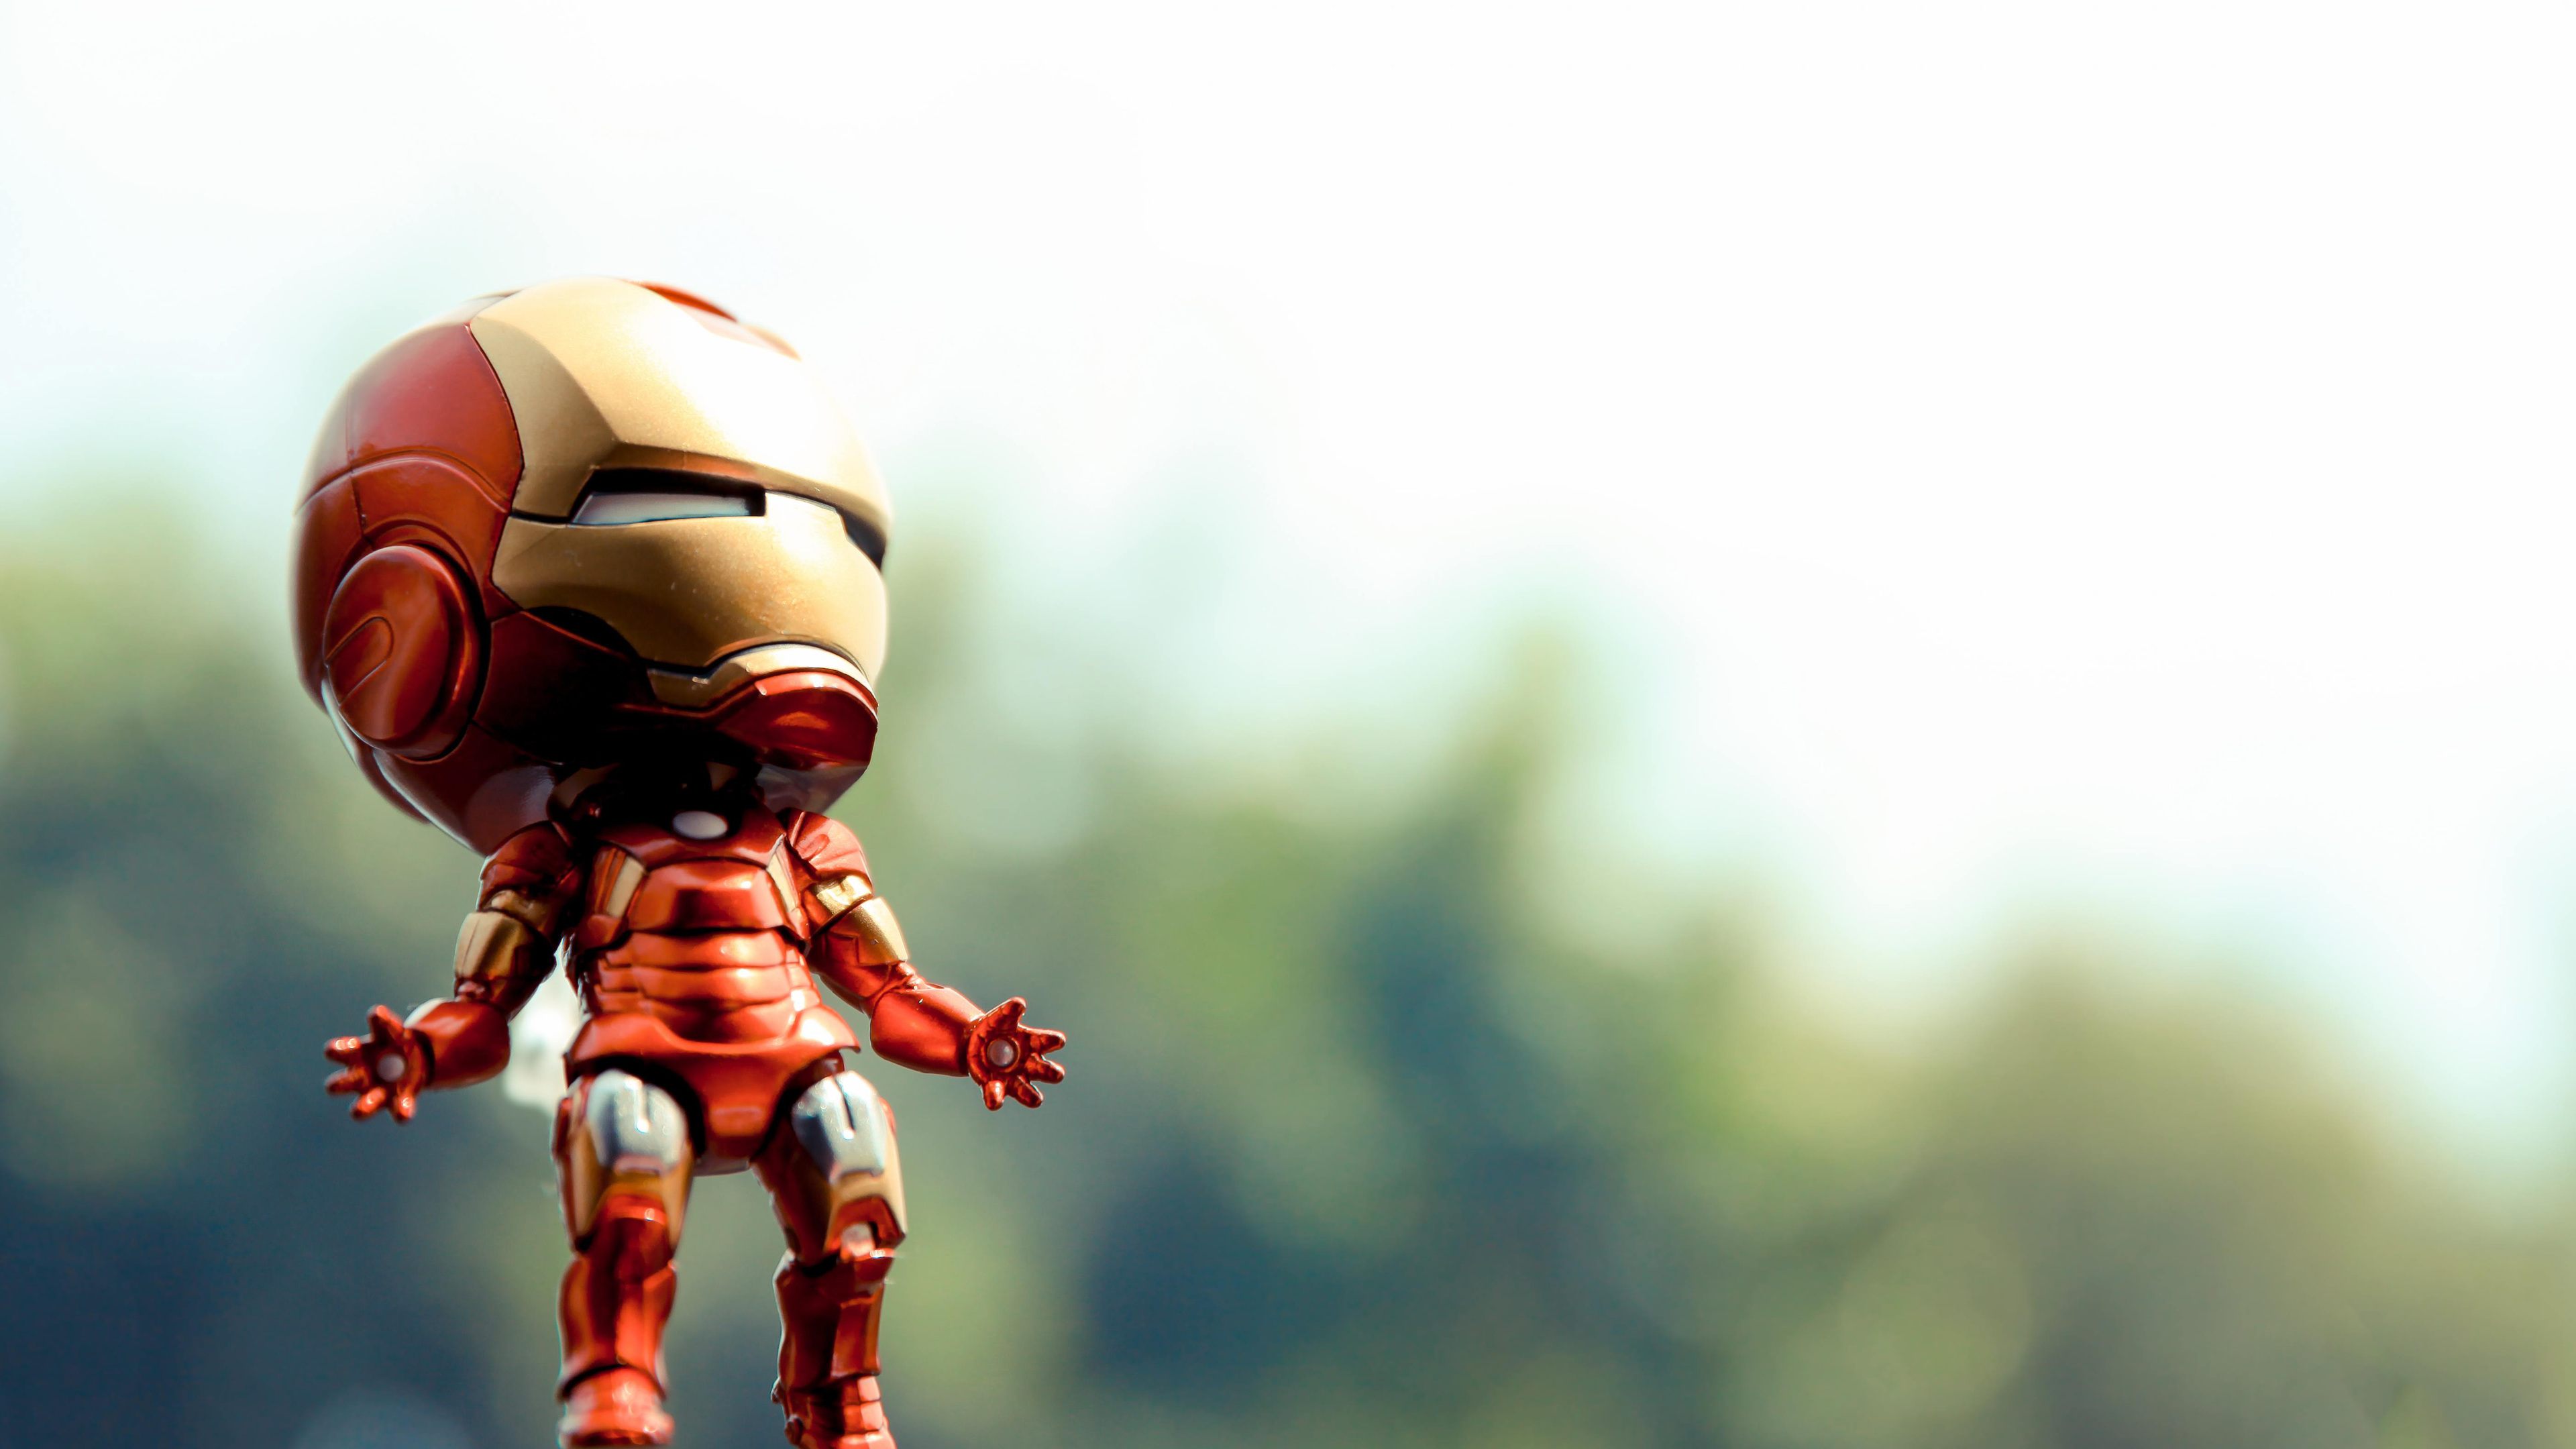 iron man toy photography 1536522412 - Iron Man Toy Photography - toys wallpapers, superheroes wallpapers, photography wallpapers, iron man wallpapers, hd-wallpapers, 5k wallpapers, 4k-wallpapers